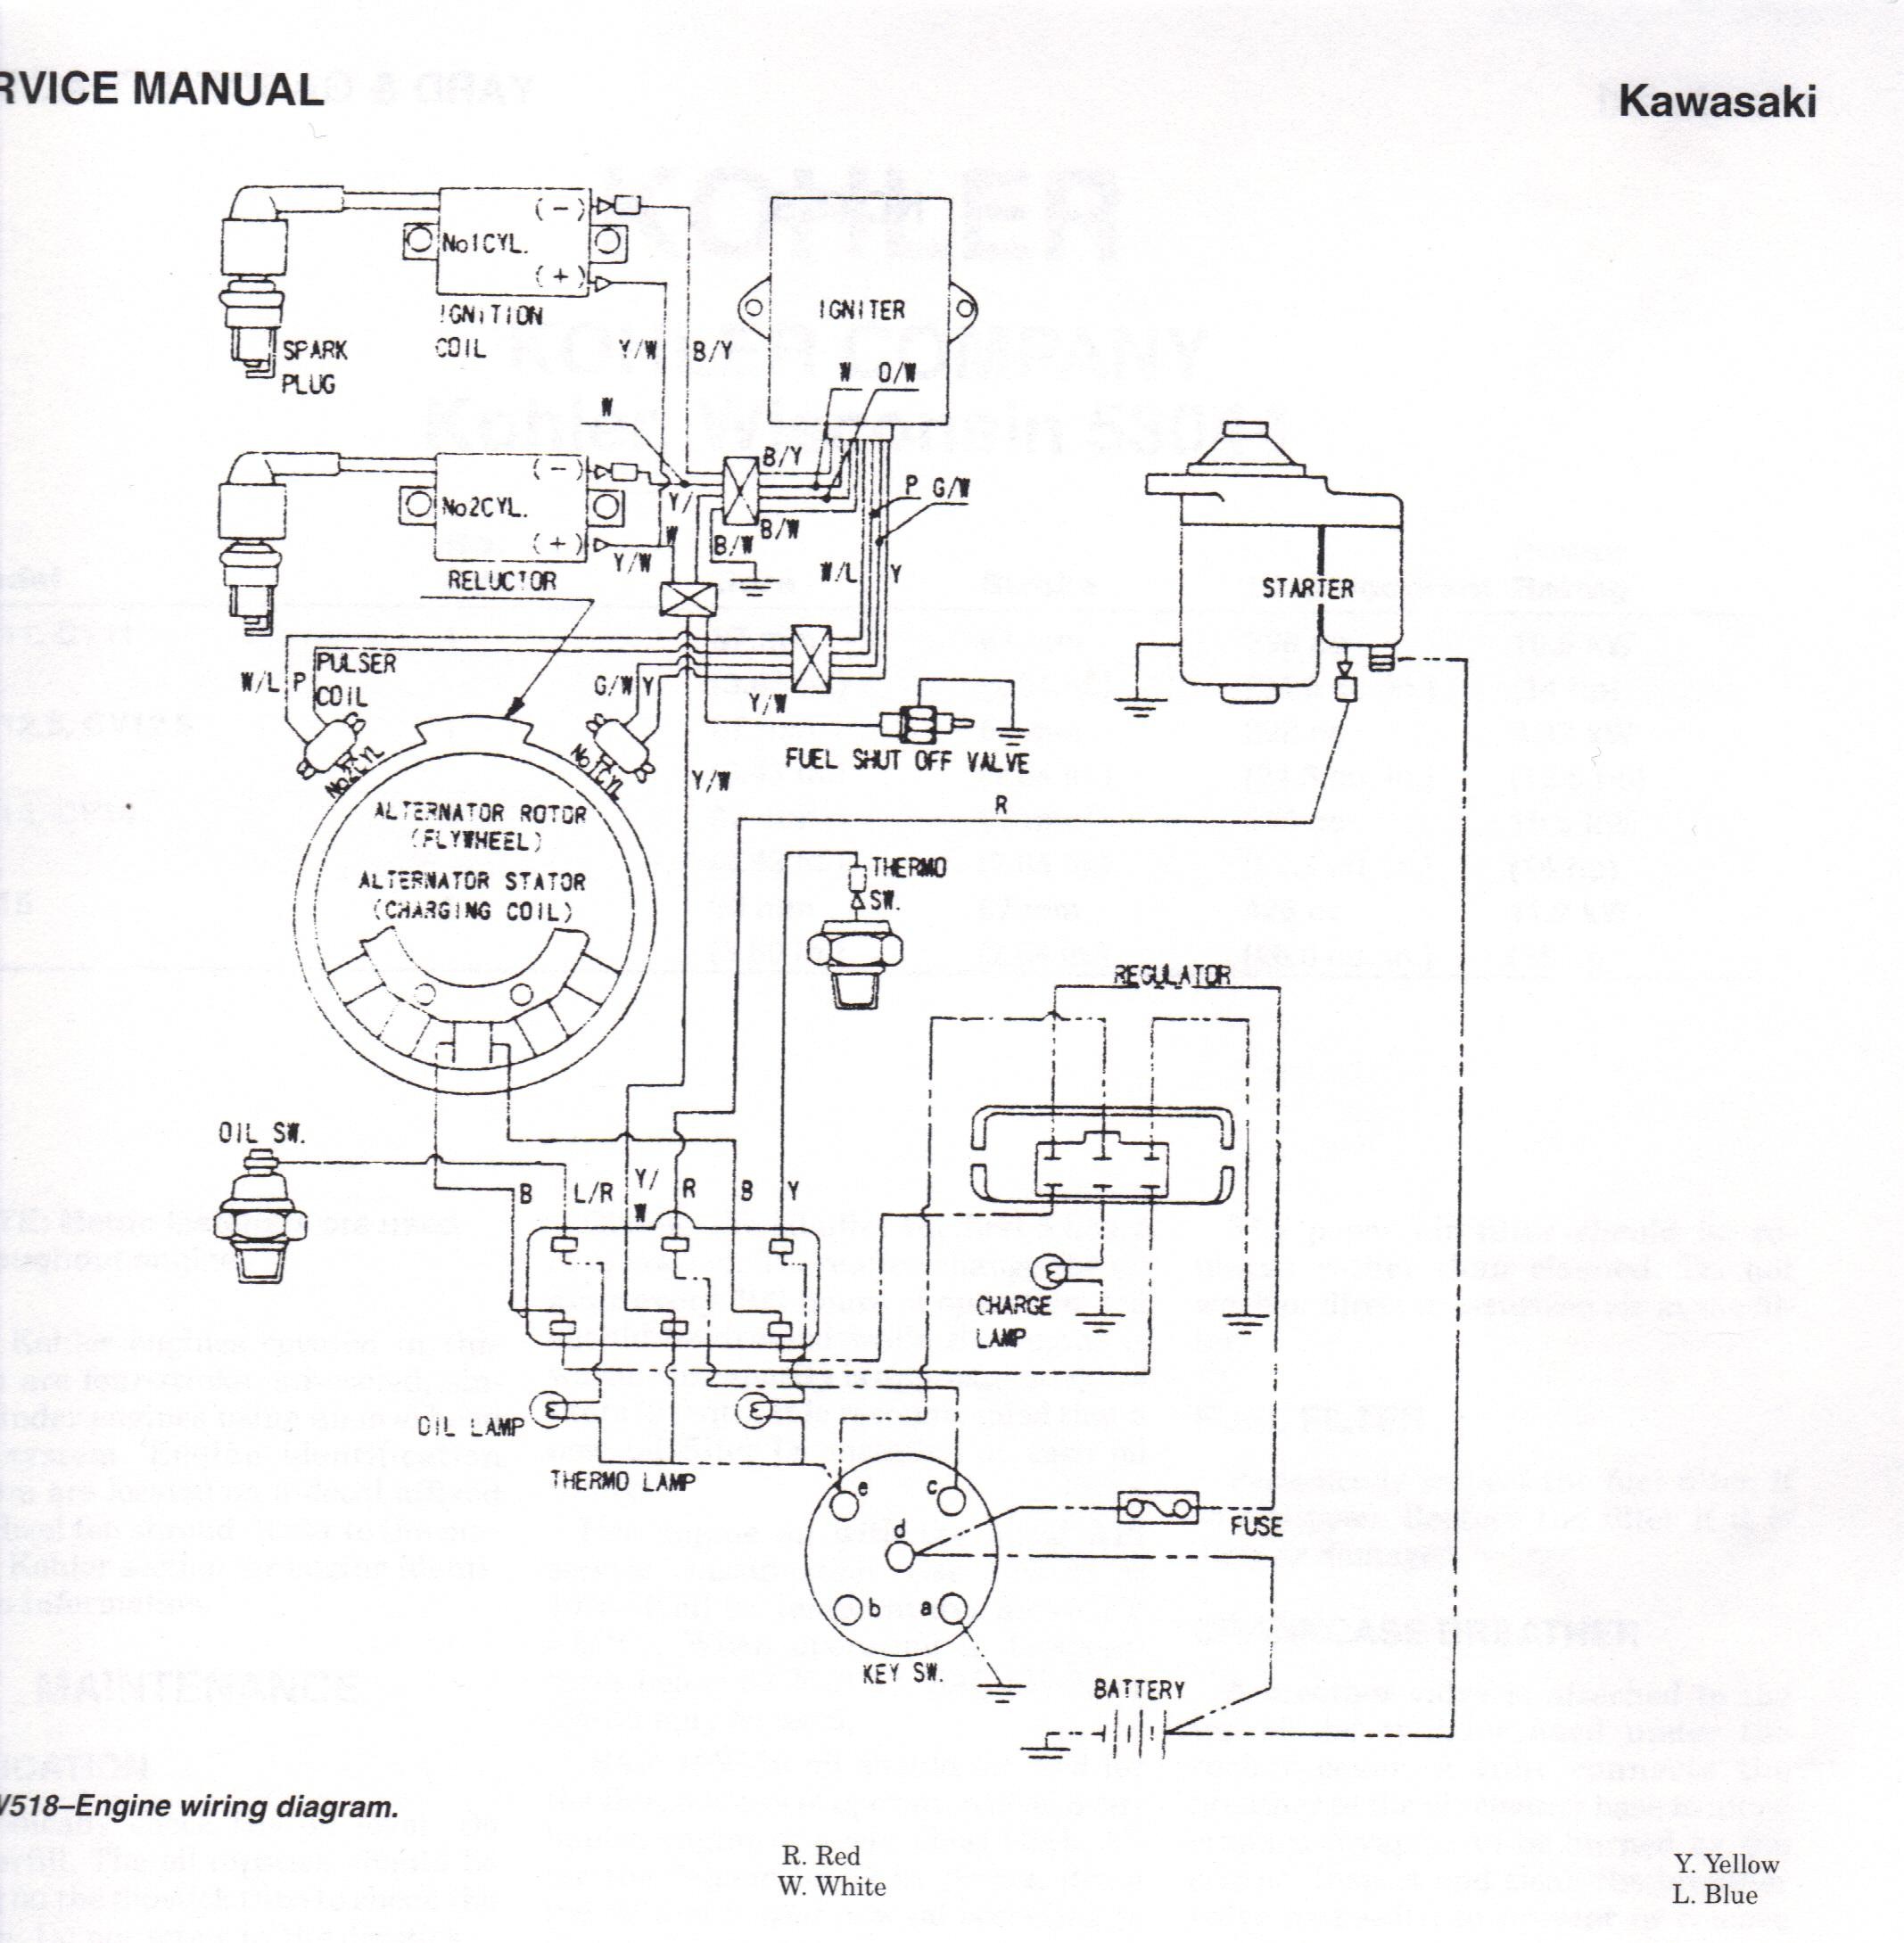 Wiring Diagram for A 345 John Deere Tractor Need to Find Info On Electrical Schematic for Deere 345 Lawn Tractor Built Around 1997 Has Of Wiring Diagram for A 345 John Deere Tractor